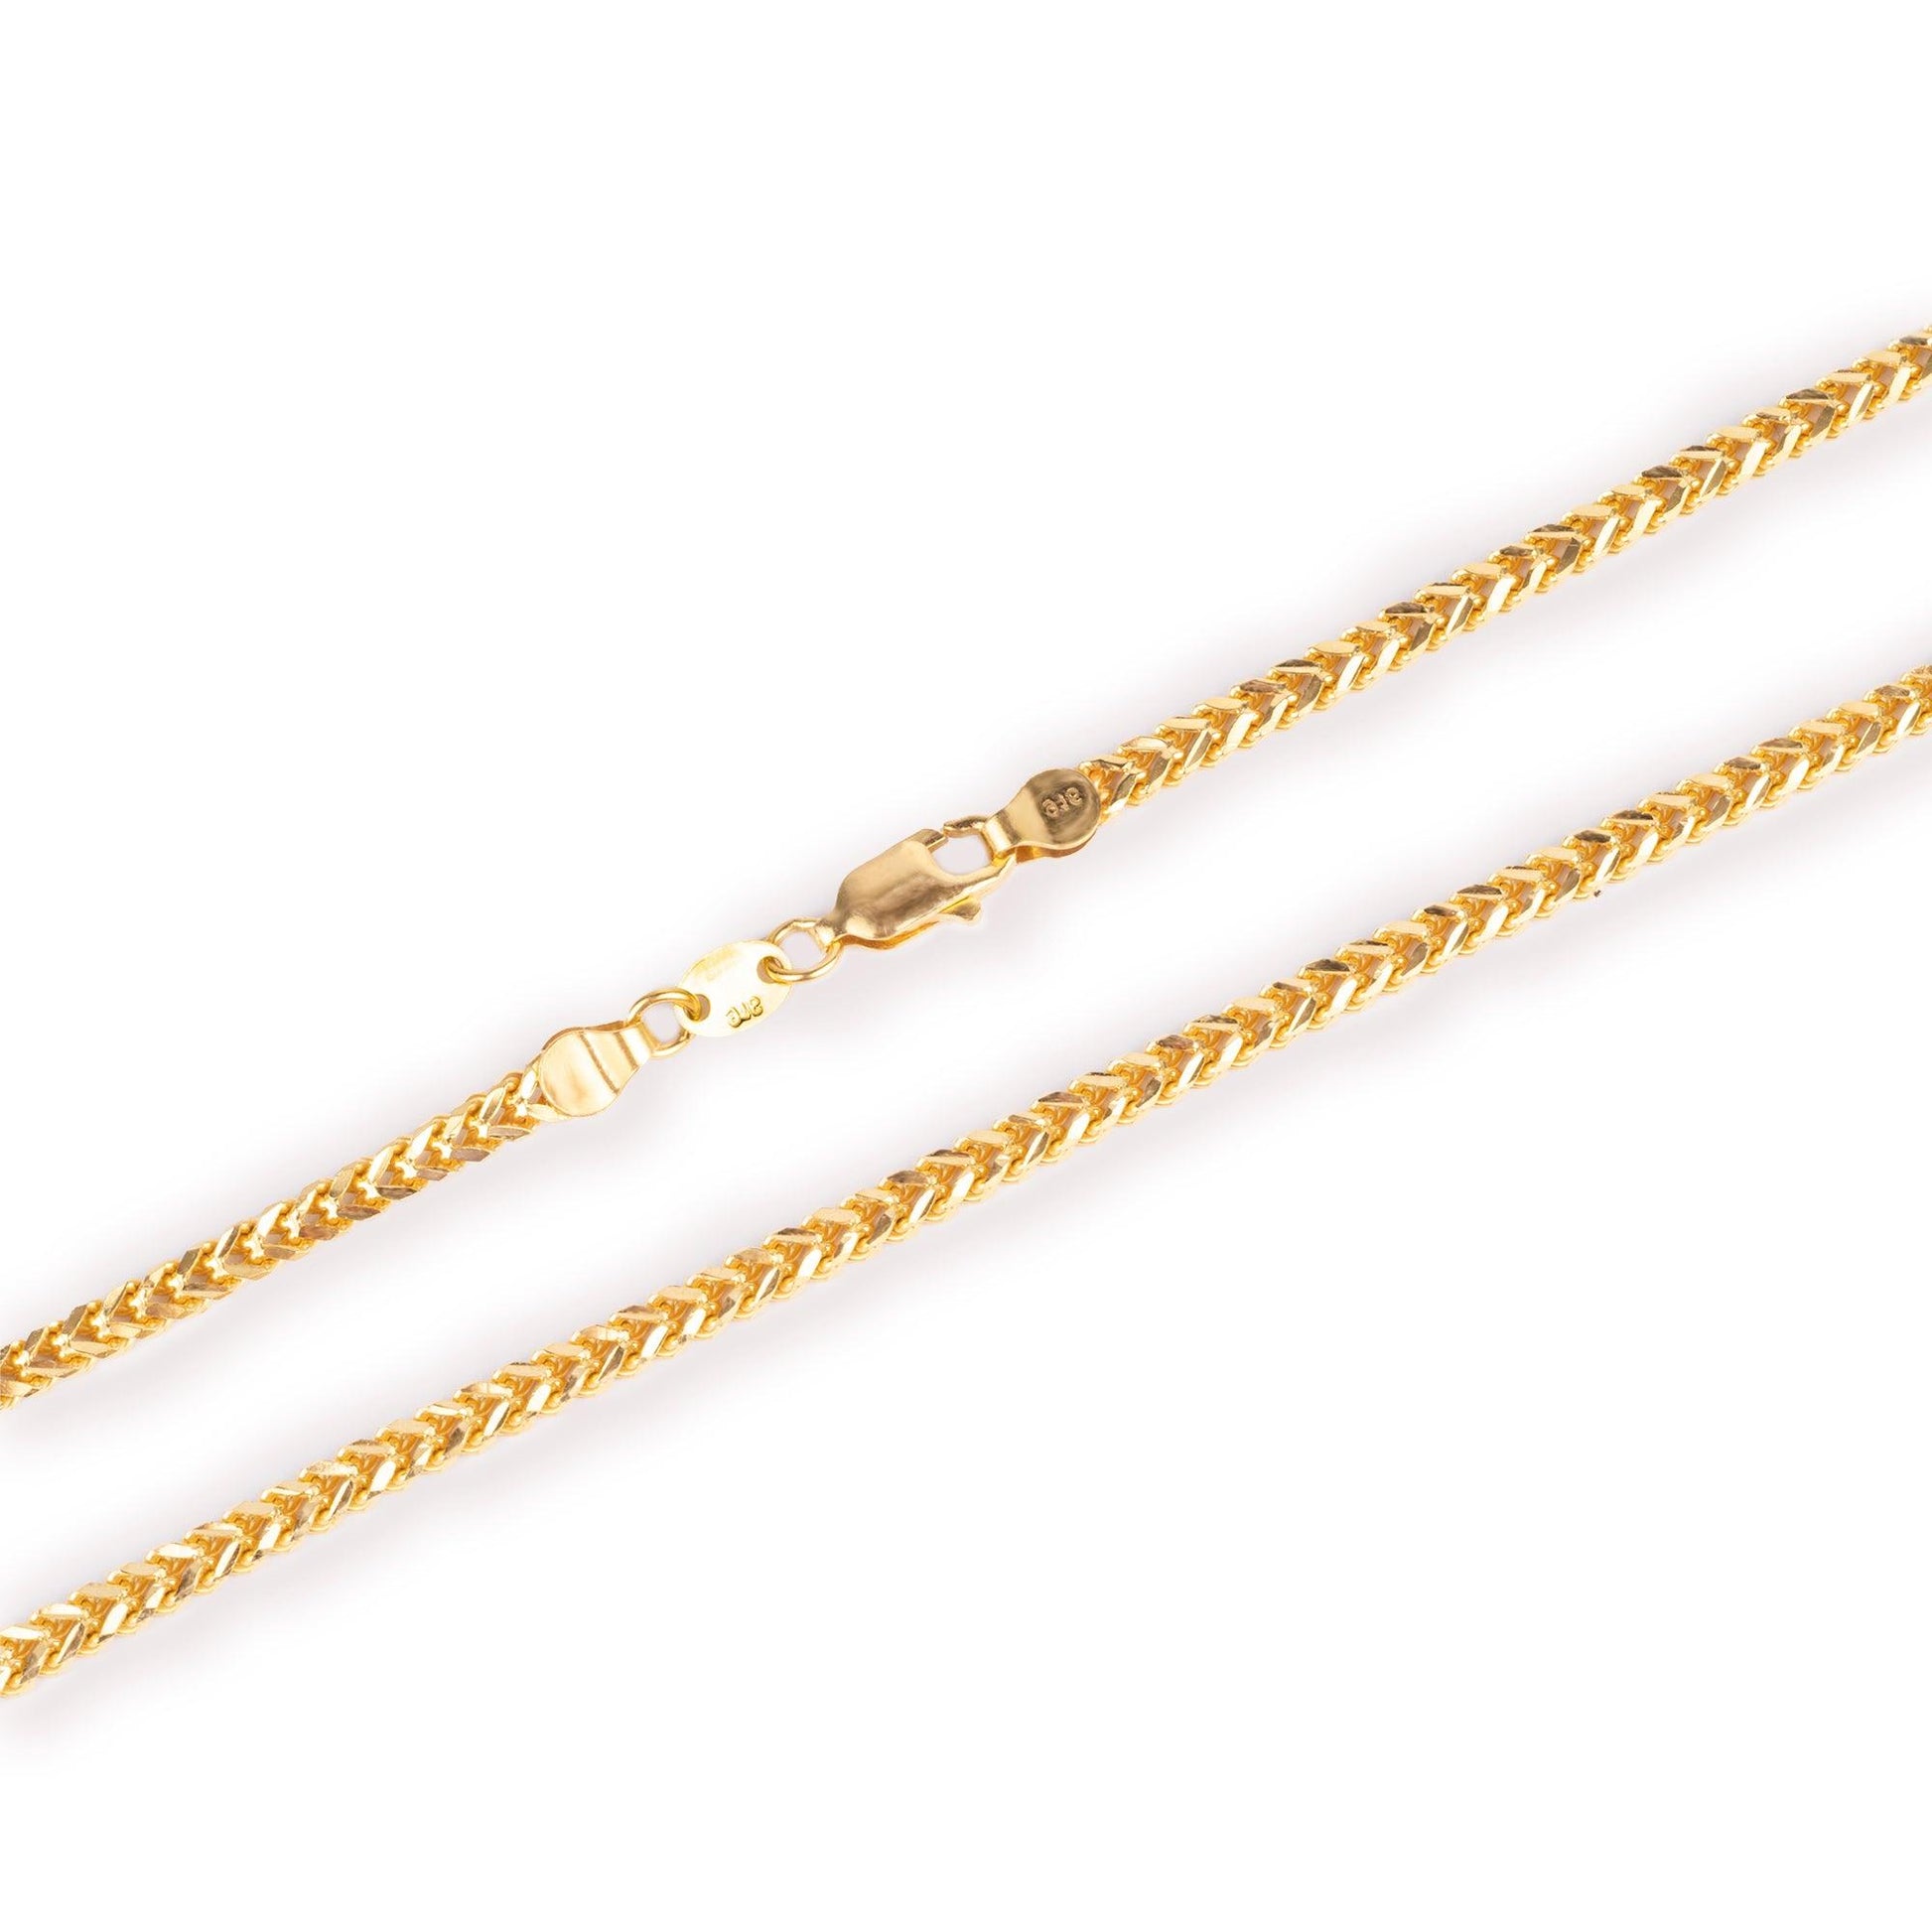 22ct Gold Foxtail Chain with Lobster Clasp C-3461 - Minar Jewellers